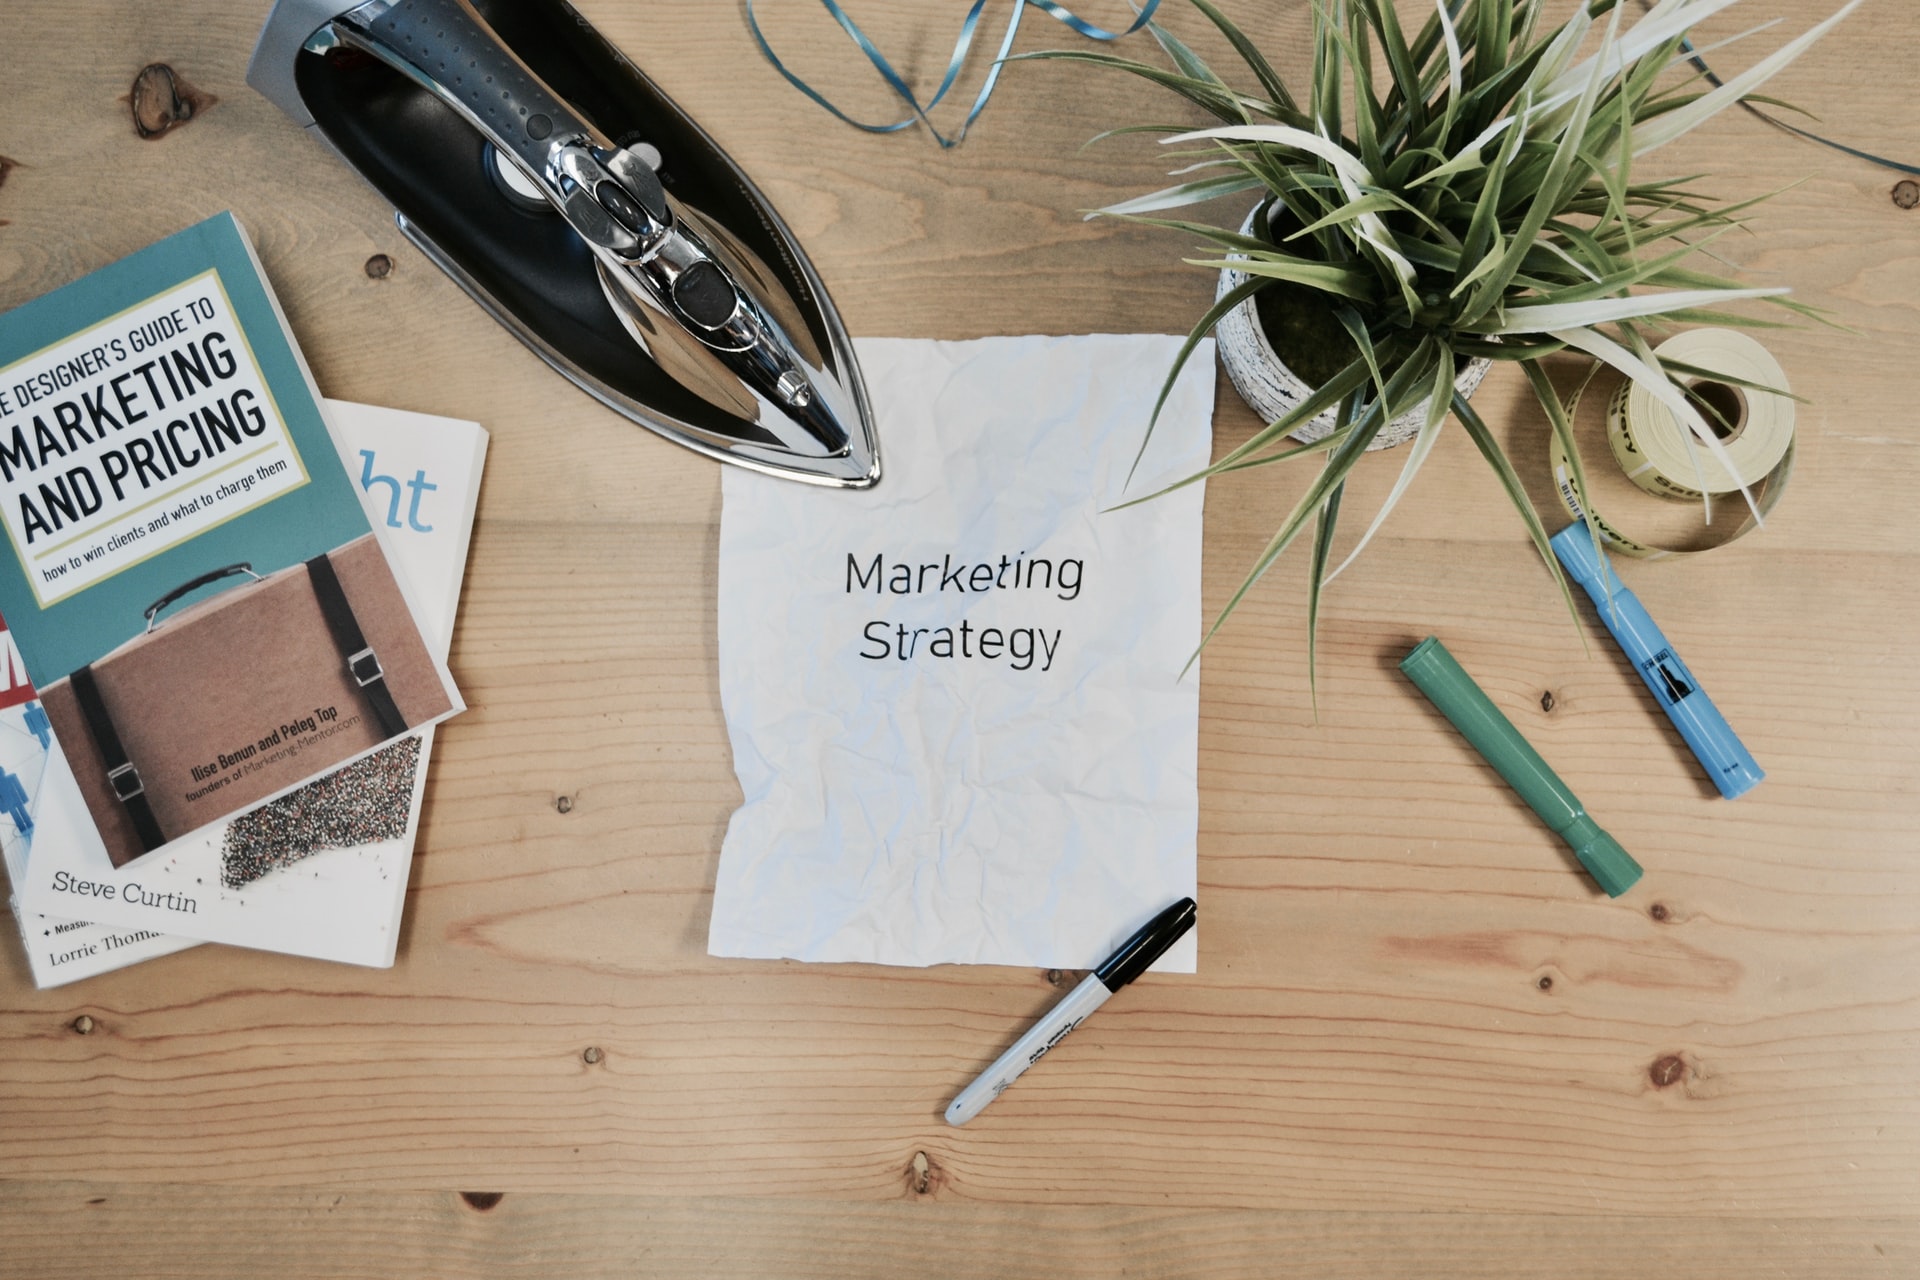 Create your own Marketing Strategy!